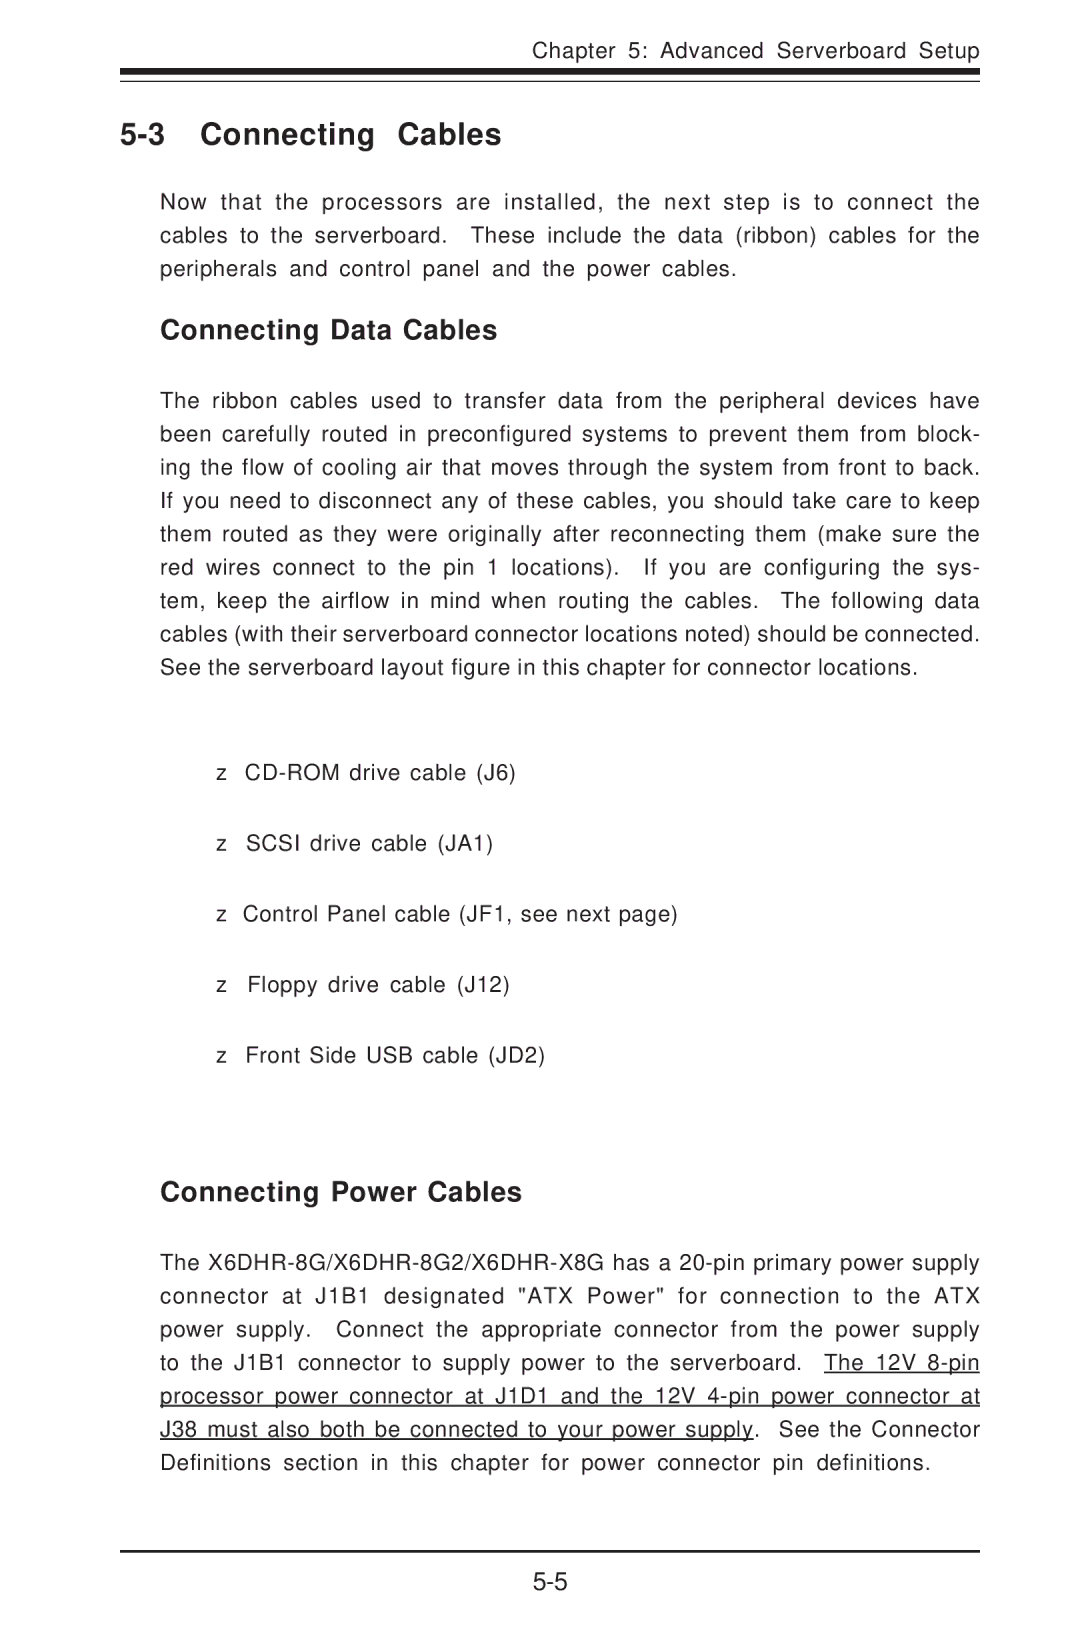 SUPER MICRO Computer 6014H-8 user manual Connecting Cables, Connecting Data Cables, Connecting Power Cables 